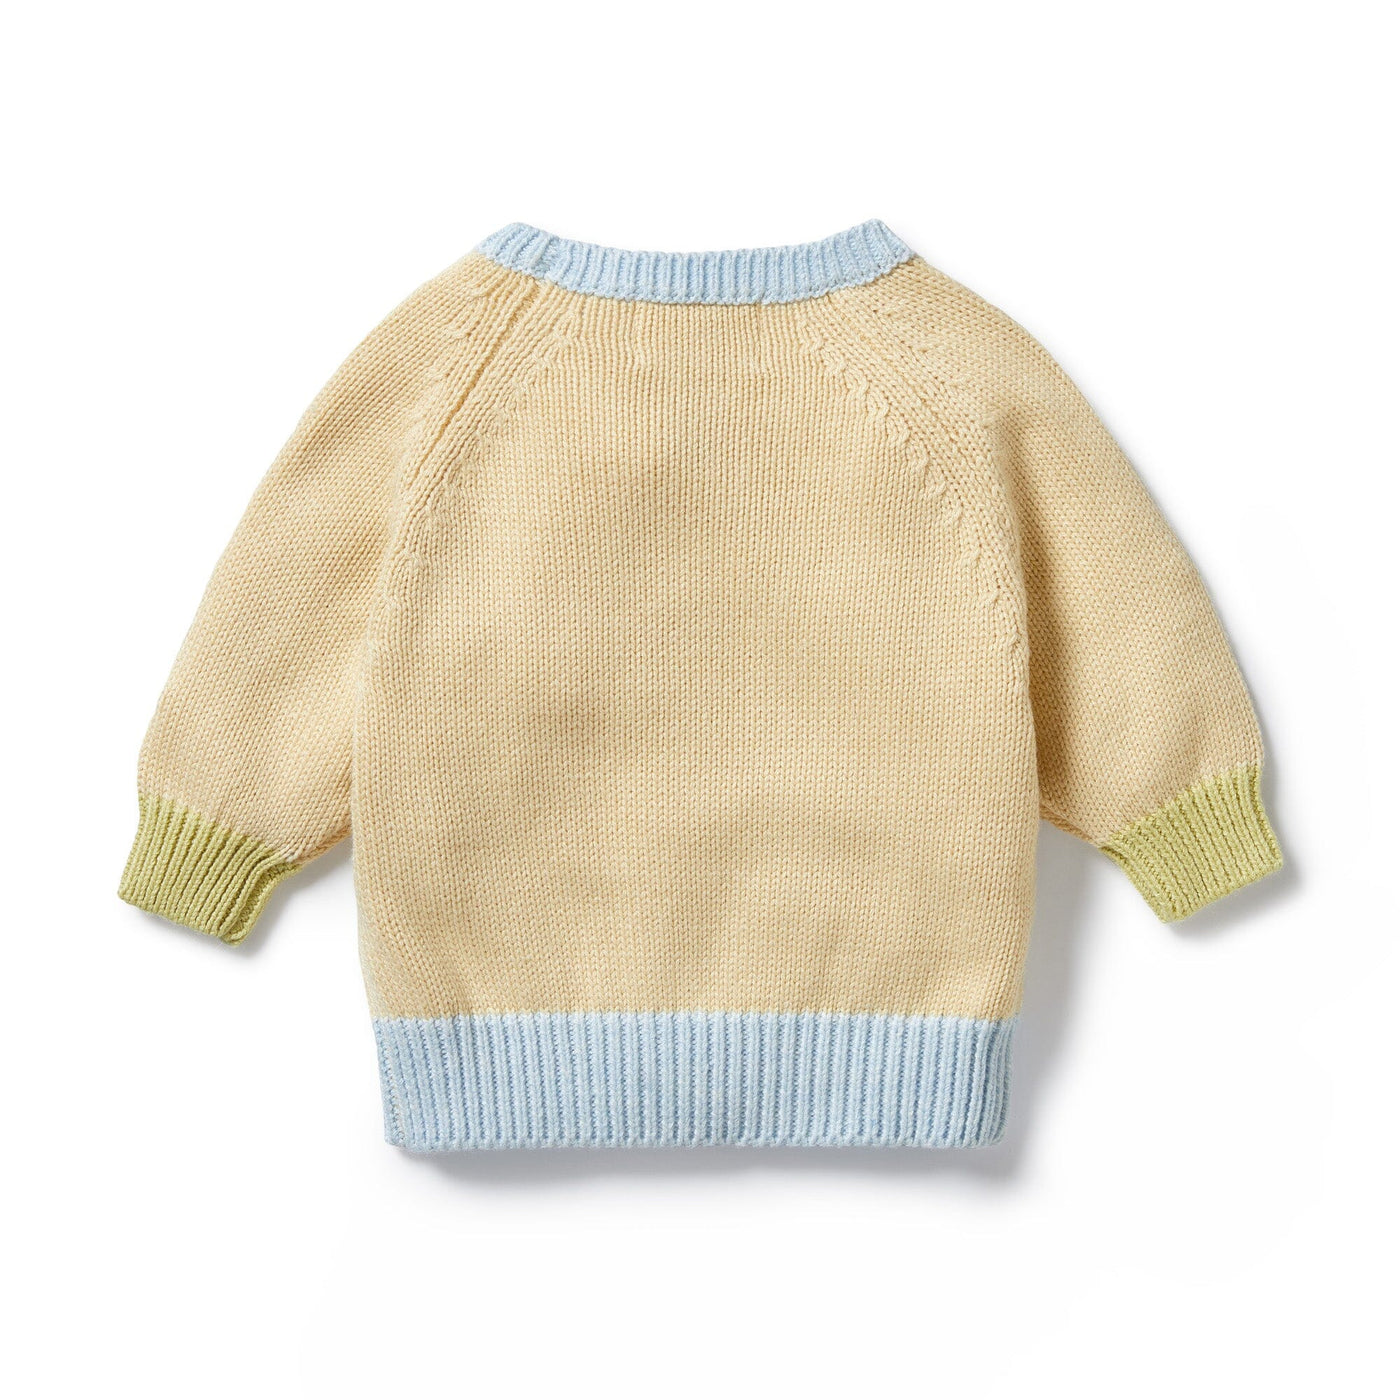 Wilson & Frenchy Knitted Jacquard Jumper - Dew Knitted Jumper Wilson & Frenchy 